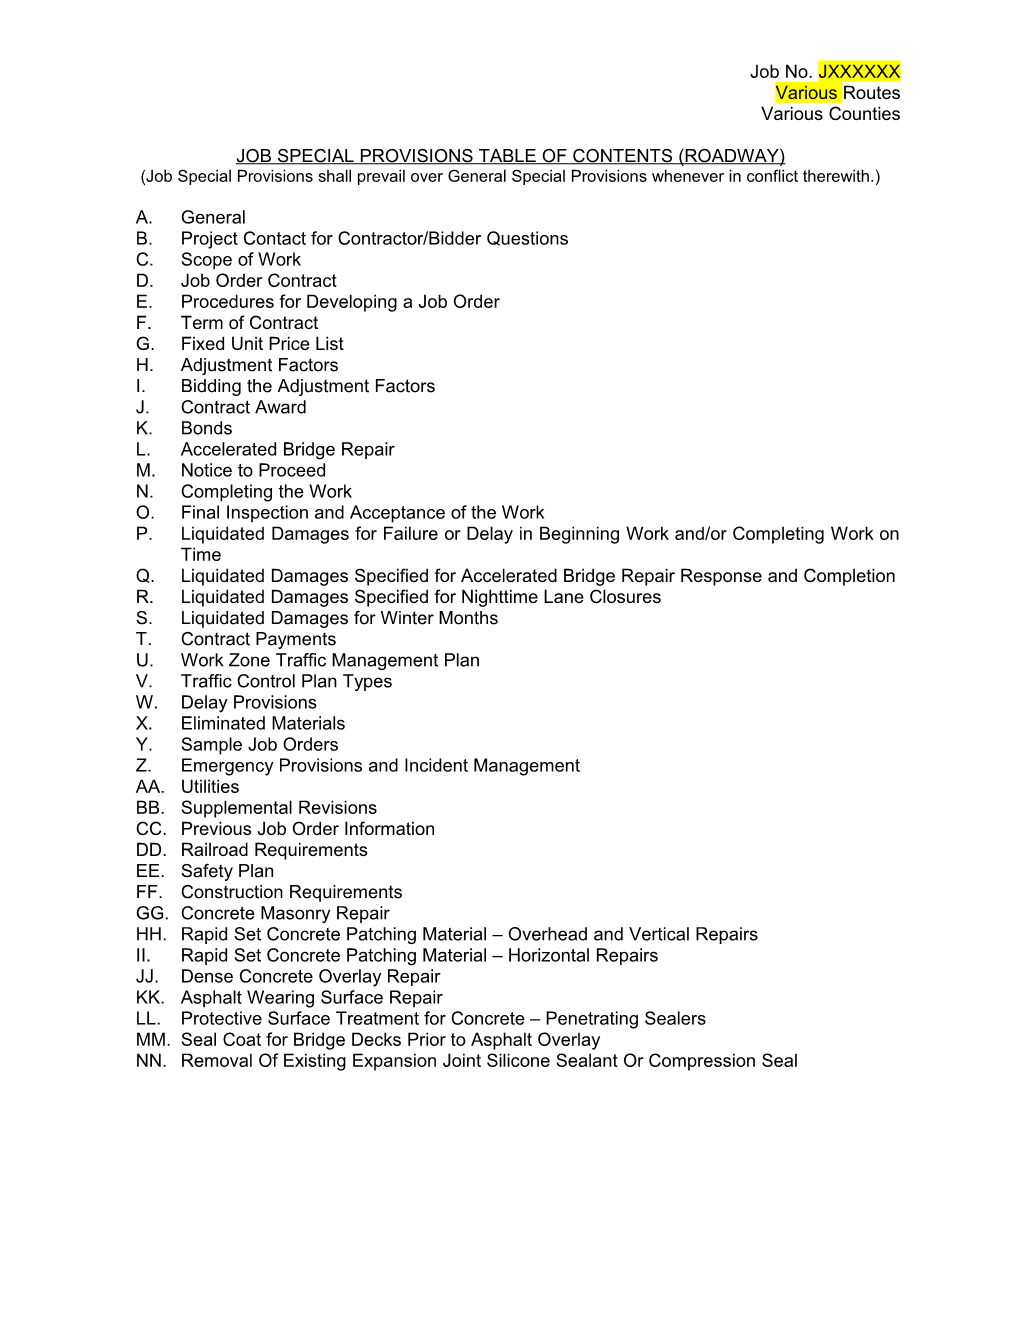 Job Special Provisions Table of Contents (Roadway)